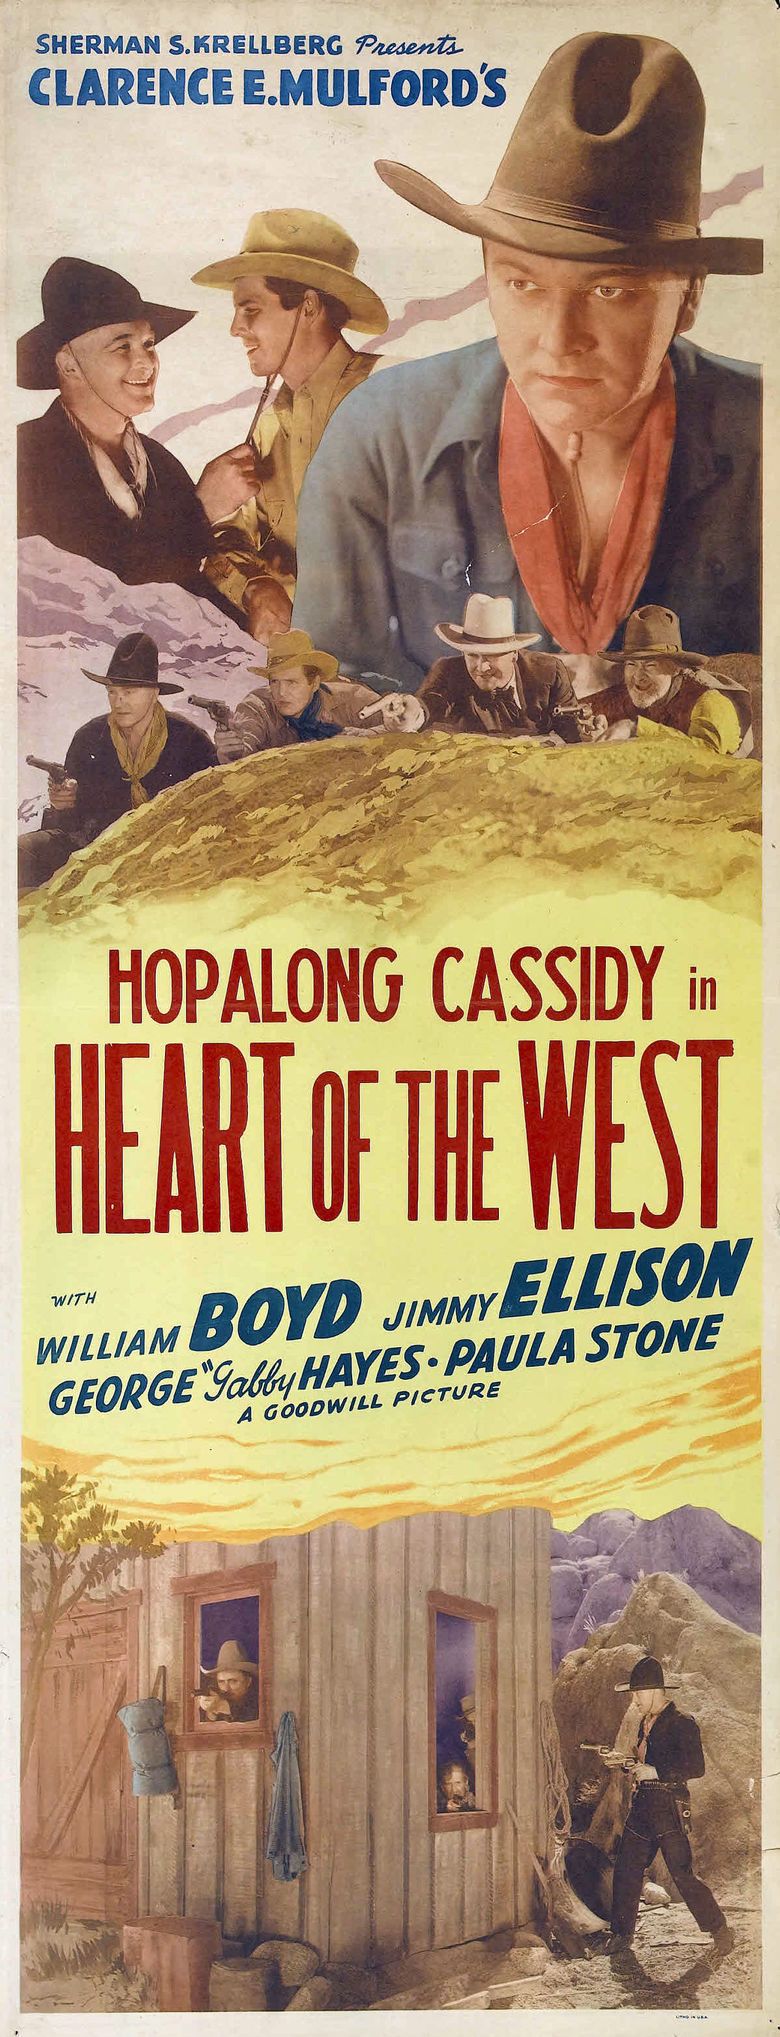 Heart of the West (film) movie poster